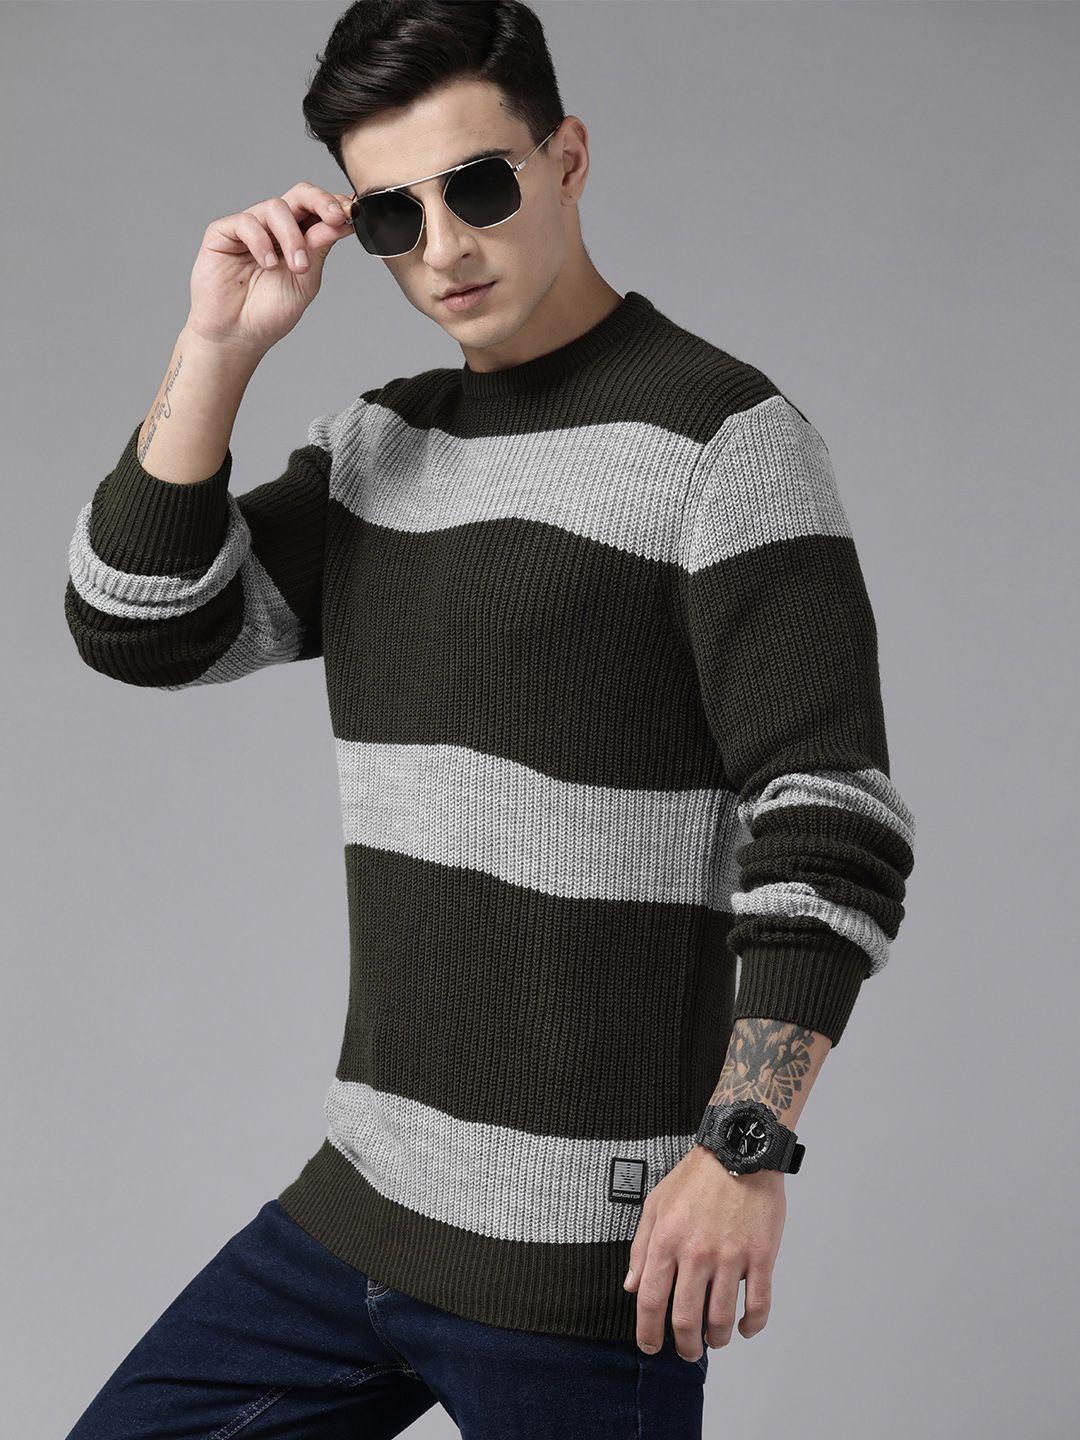 the-roadster-lifestyle-co.-men-striped-acrylic-pullover